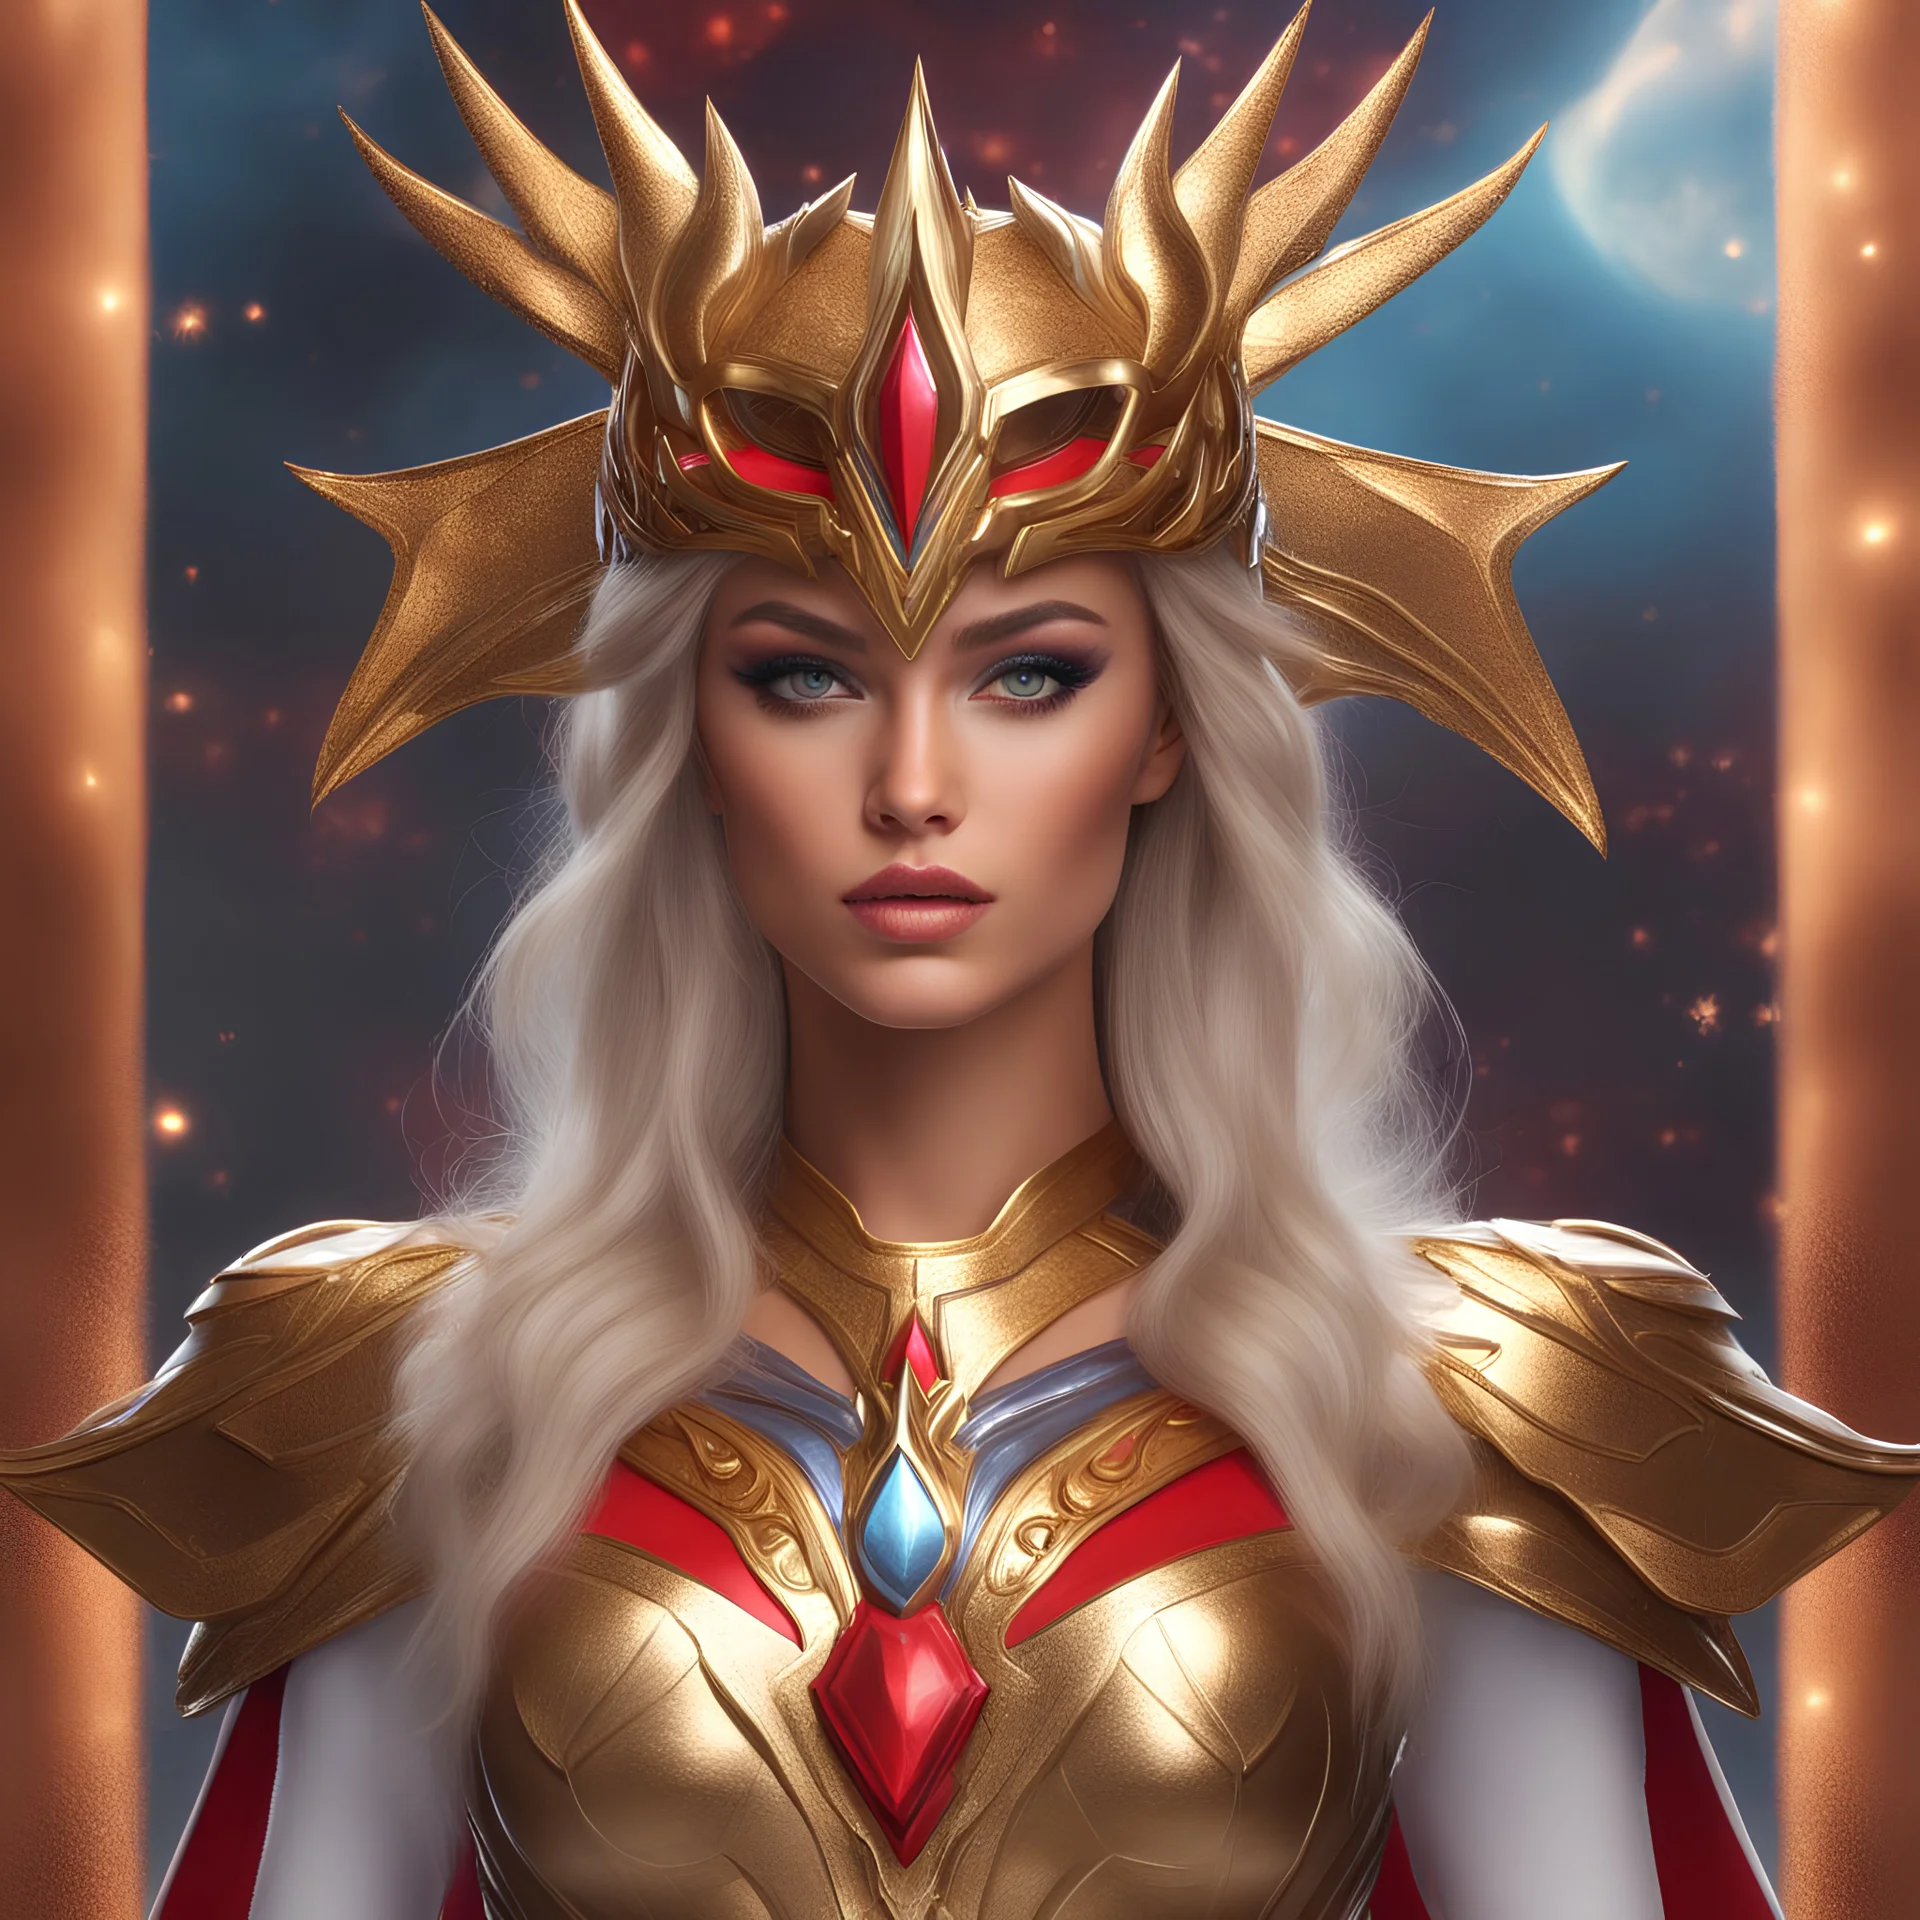 Realistic 32k full body She-RA on full HD, ultra detailed, delicate details, slow shutter, Hyper-realistic,, High resolution, High definition, super-resolution, High speed phototography, Insanely detailed and intricate, beautiful, stunning, brilliant, accurate, fine, dramatic, precise, luxe, vivid, ultimate, 32K High Definition photo-realism, witness the majesty of She-Ra, starting from her toes meticulously detailed, radiating an ethereal glow. Progress to her feet, defining arches with sub